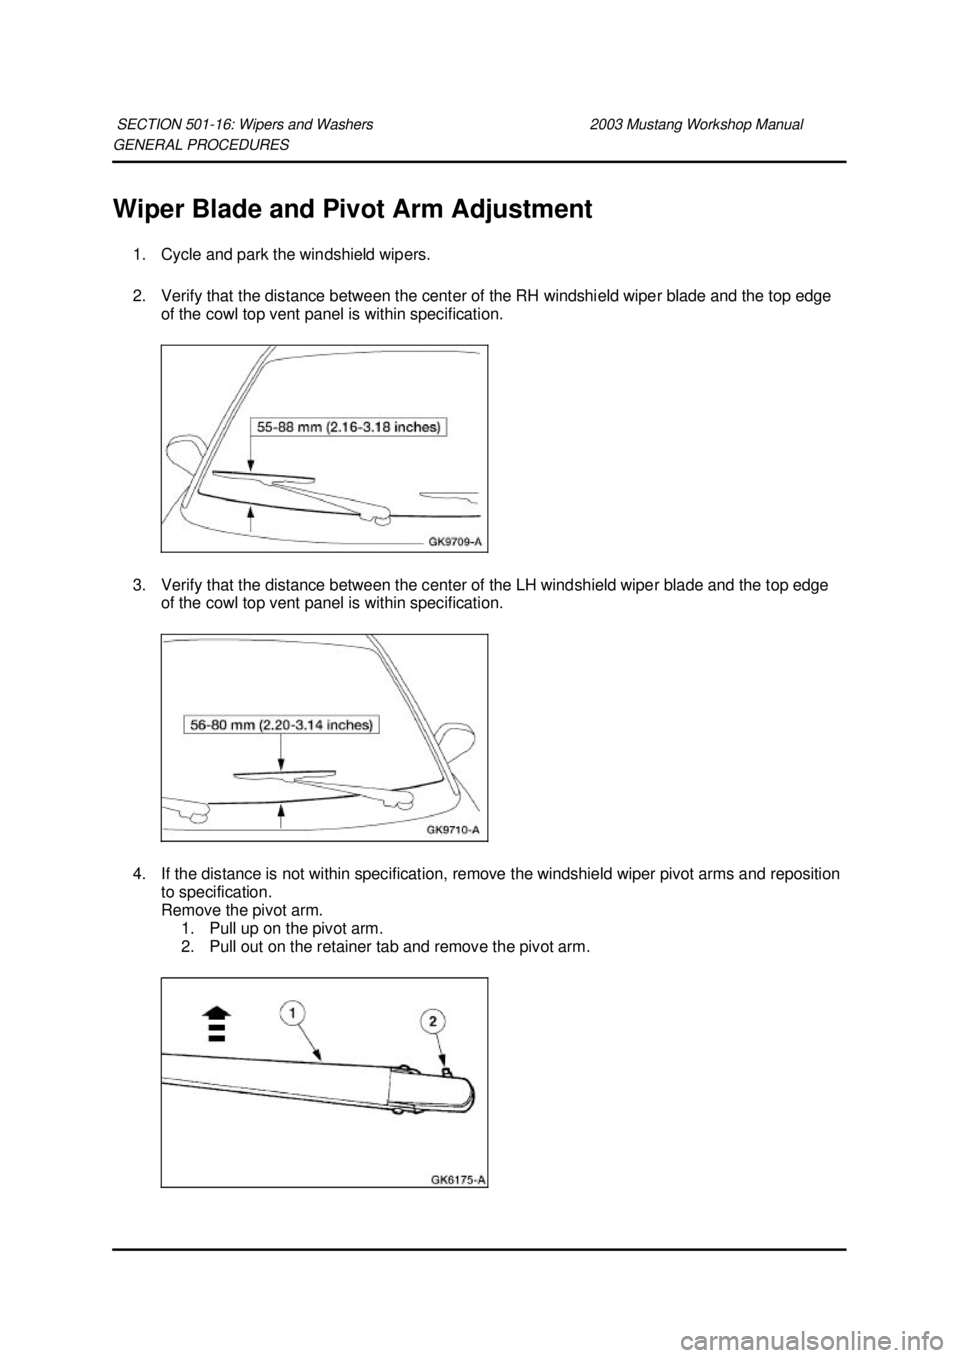 FORD MUSTANG 2003  Workshop Manual GENERAL PROCEDURES 
Wiper Blade and Pivot Arm Adjustment 
1. Cycle and park the windshield wipers. 
2. Verify that the distance between the center of the RH windshield wiper blade and the top edge  of